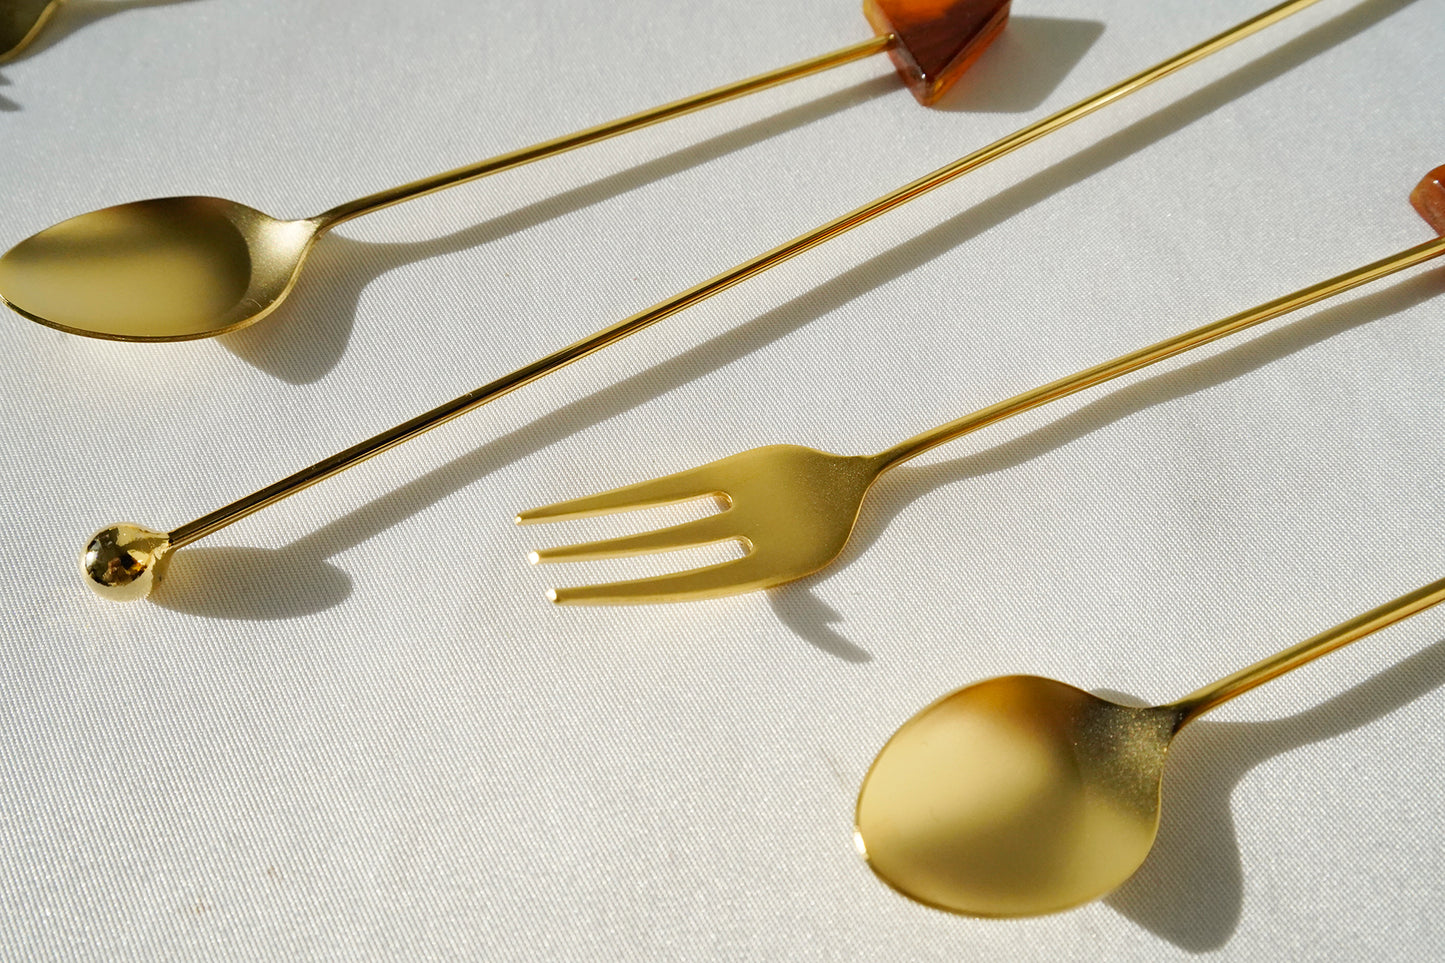 Block series Acrylic cutlery spoon, fork, cocktail stirrers